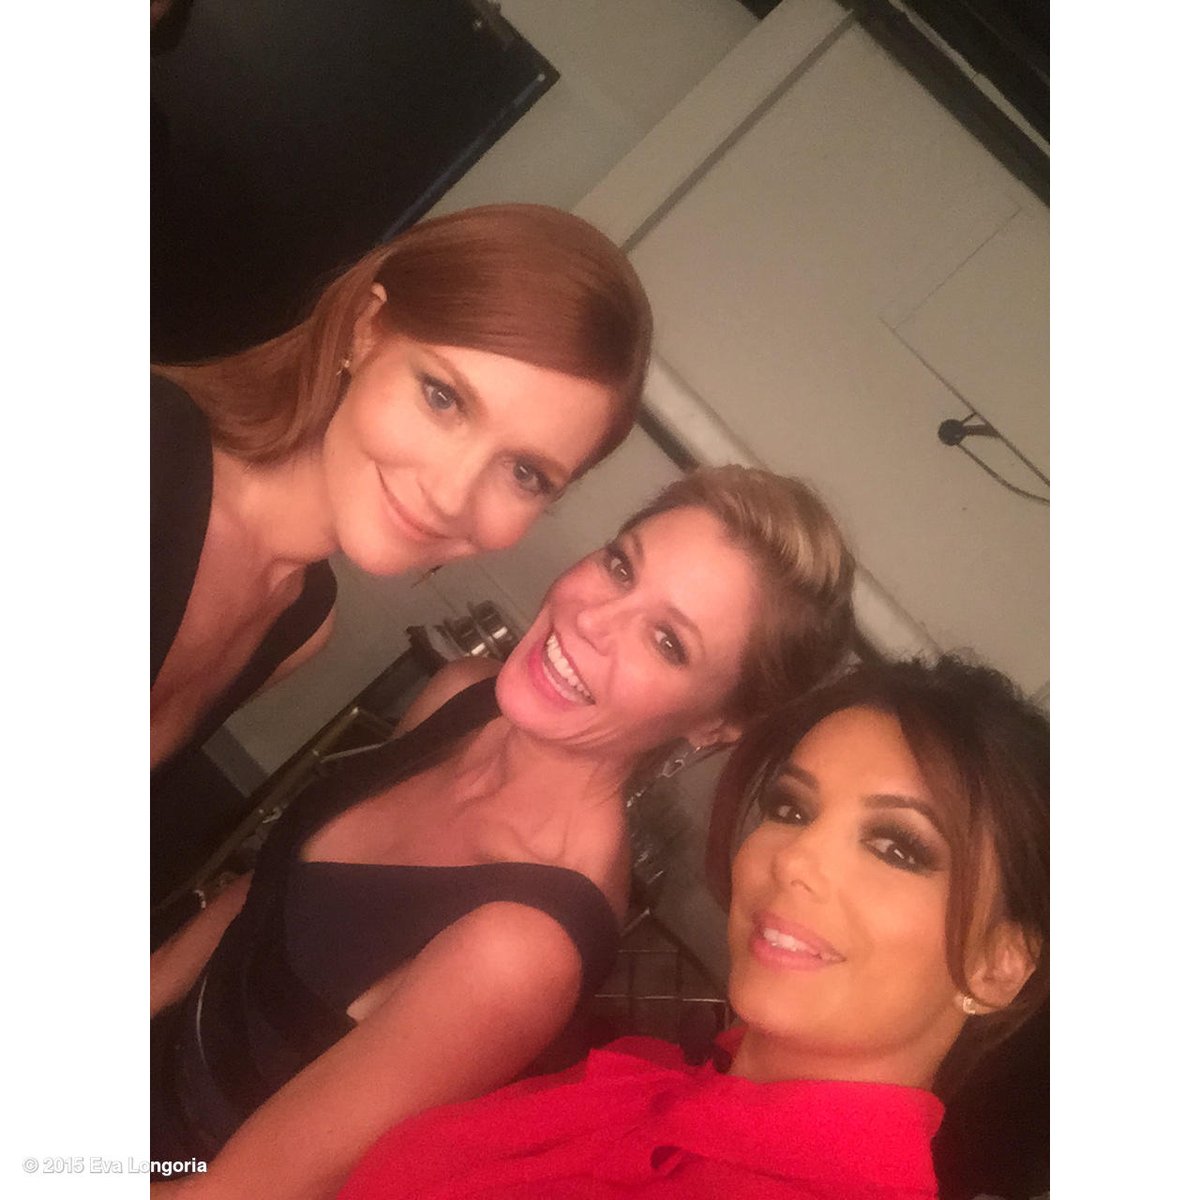 Girls night out! @juliebowen and @darbysofficial Don't be jealous @kerrywashington ! #ModernFamily #Scandal https://t.co/NcExdO7j6N